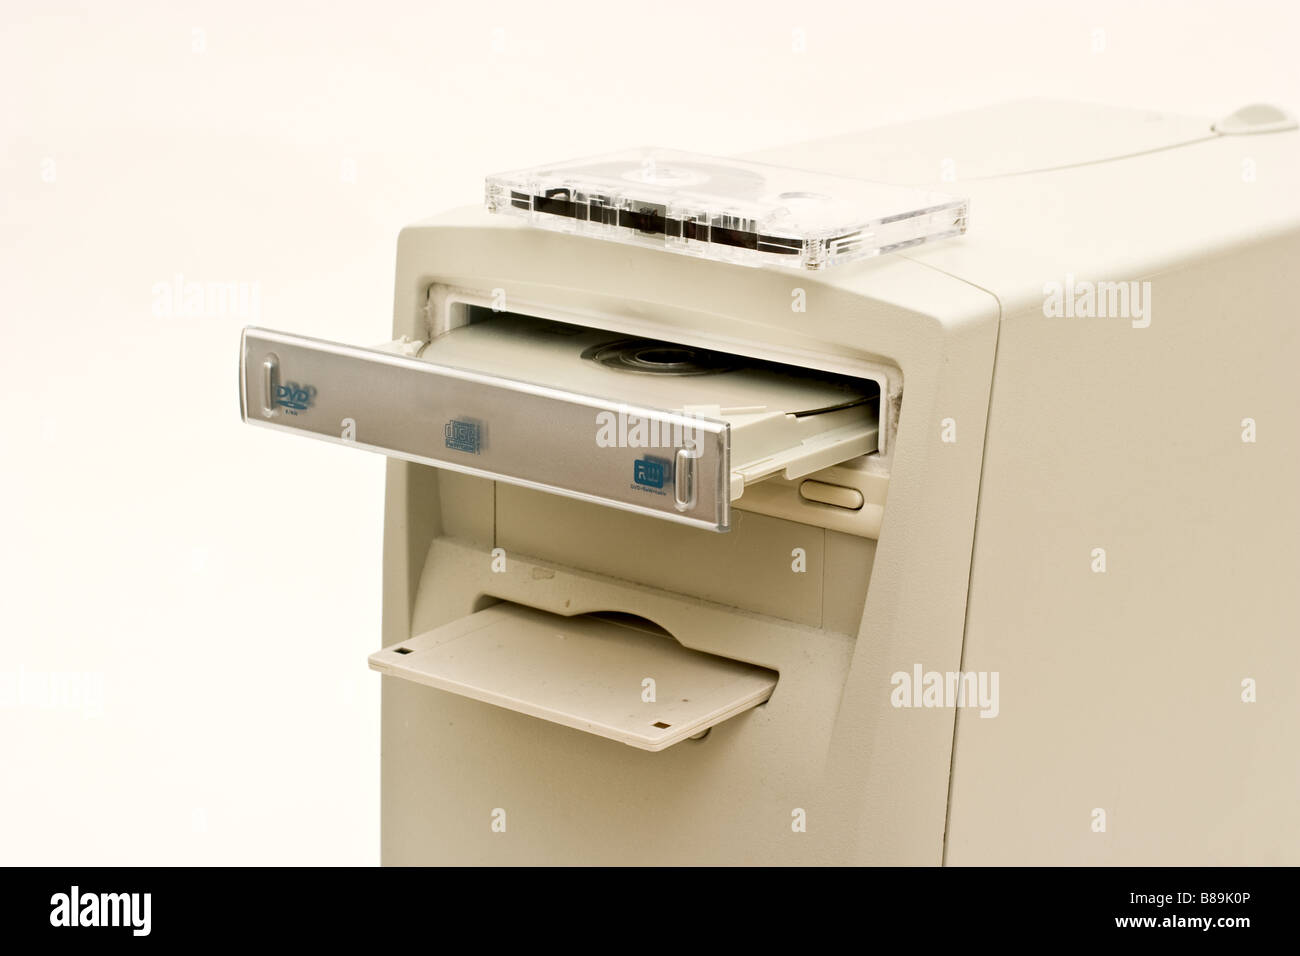 Old tan computer with diskette, cd and tape in drives Stock Photo